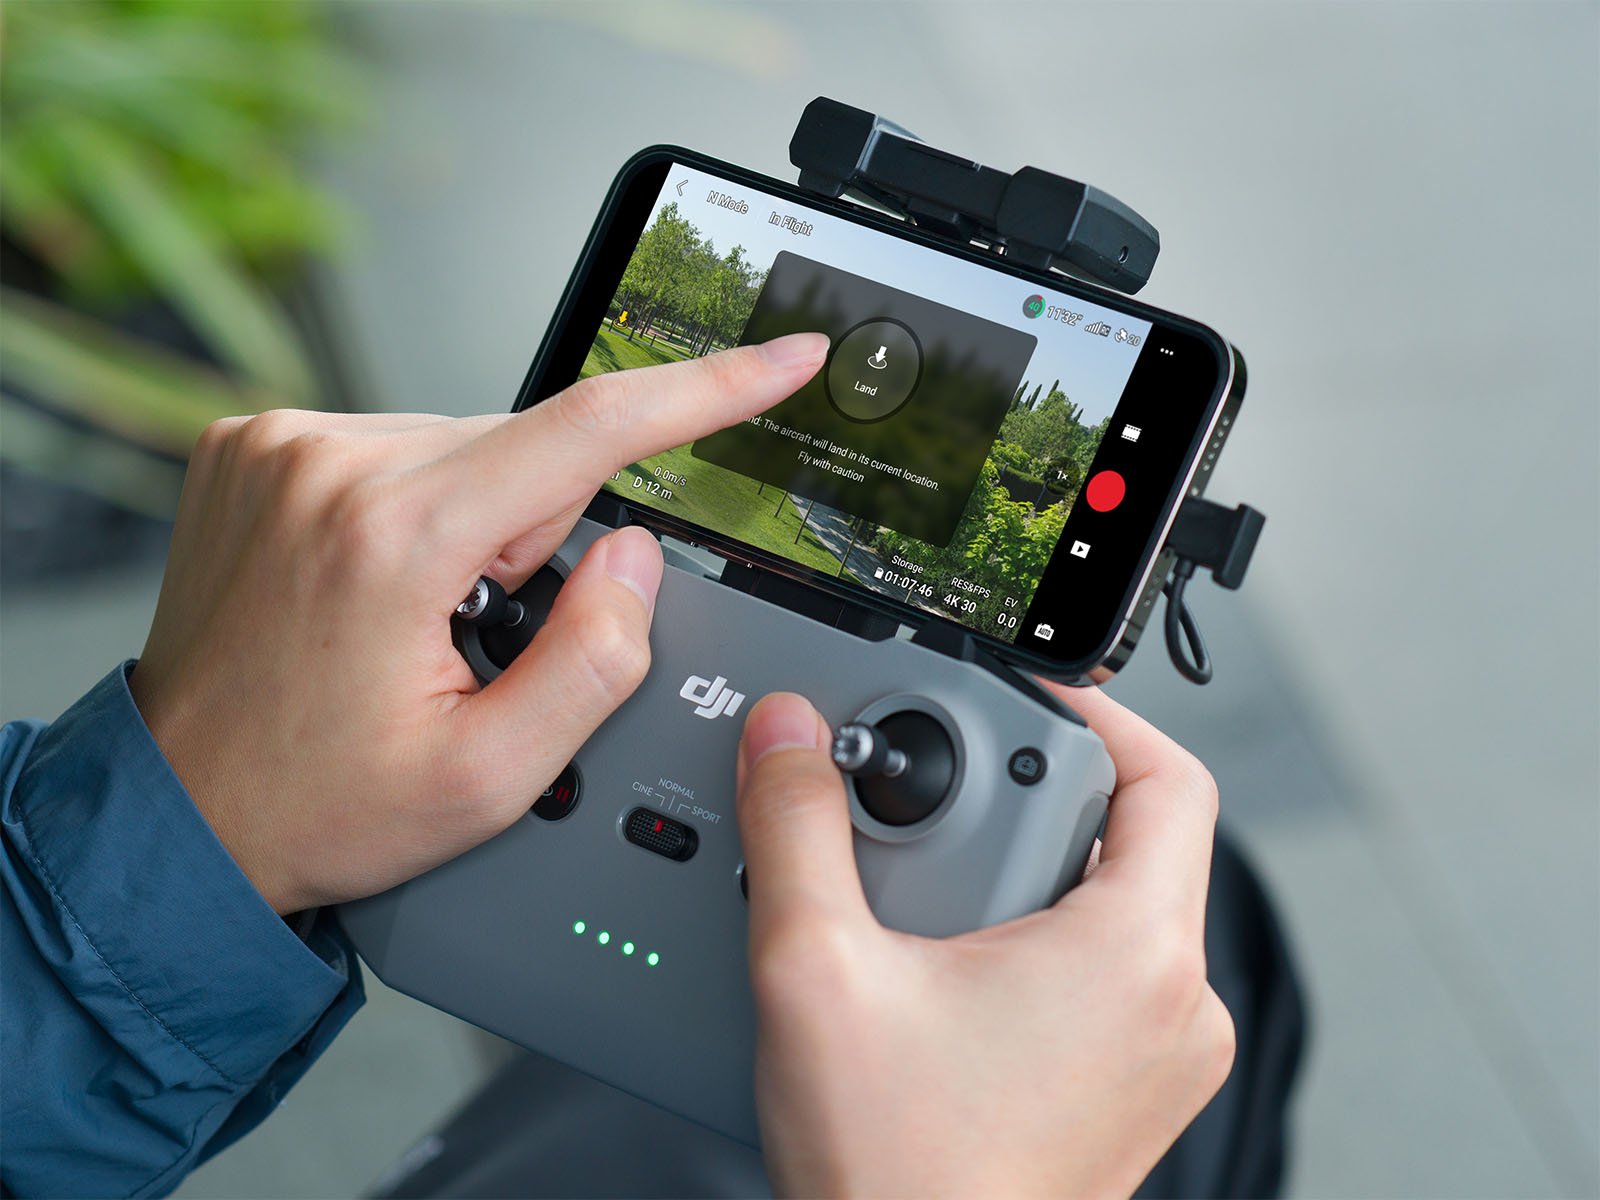 Hands of a person using a drone controller with a smartphone attached, displaying a camera view of greenery on the screen.